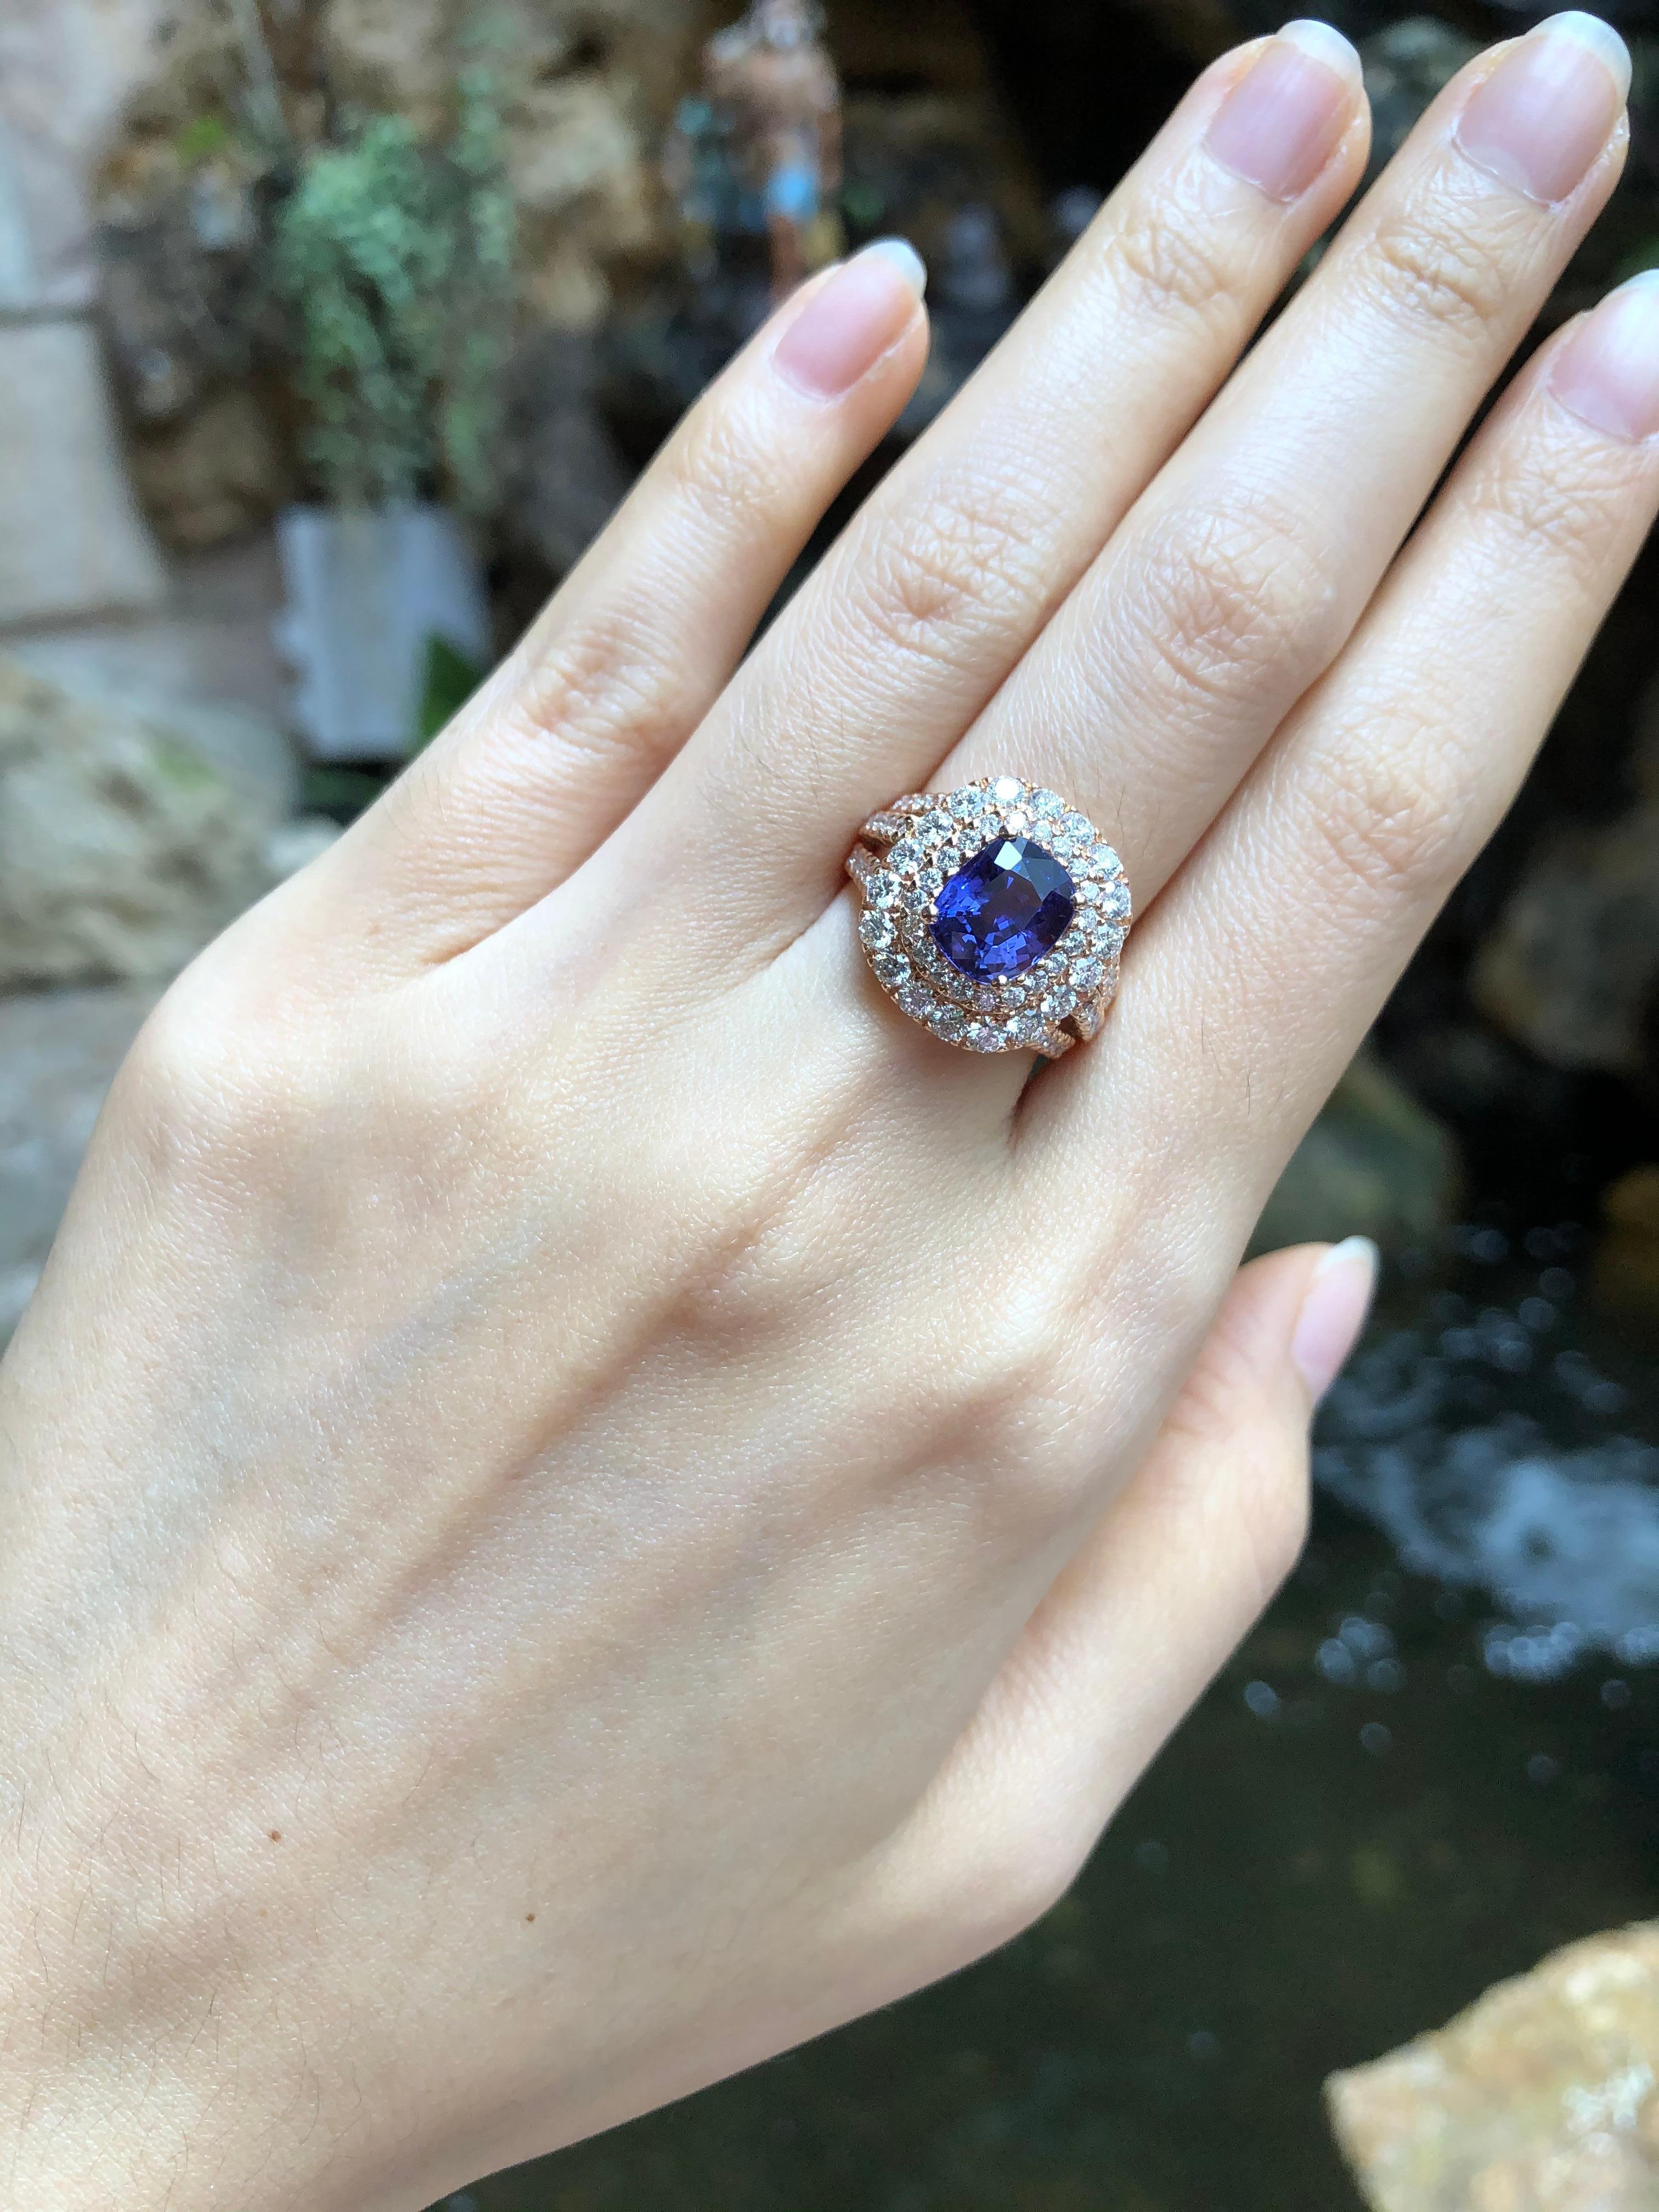 Purple Sapphire 3.10 carats with Diamond 1.49 carats Ring set in 18 Karat Rose Gold Settings
(GIT Certified, The Gem and Jewelry Institute of Thailand)

Width:  1.3 cm 
Length: 1.6 cm
Ring Size: 52
Total Weight: 7.46 grams

